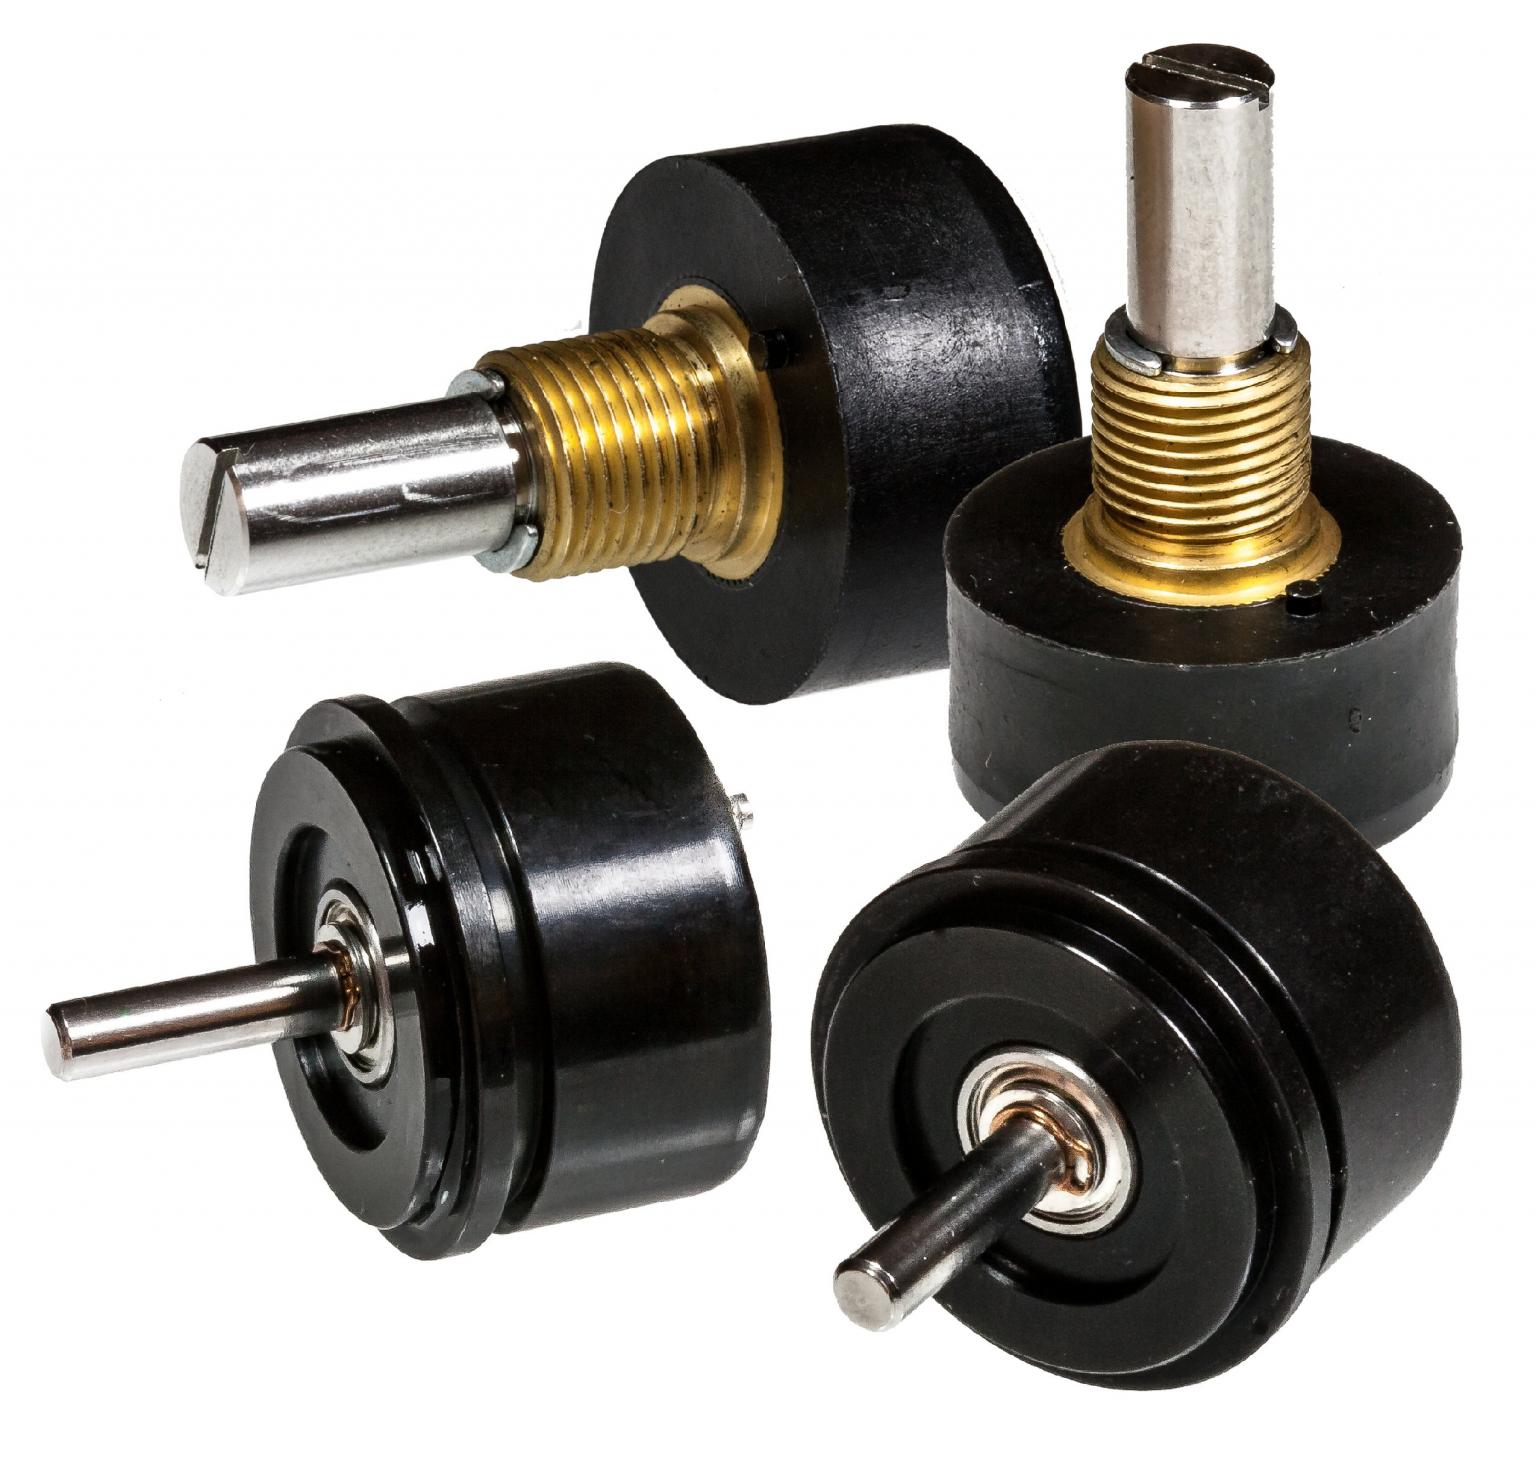 Rotary Position Sensors Use Hall Effect For Exceptional Rotational Life